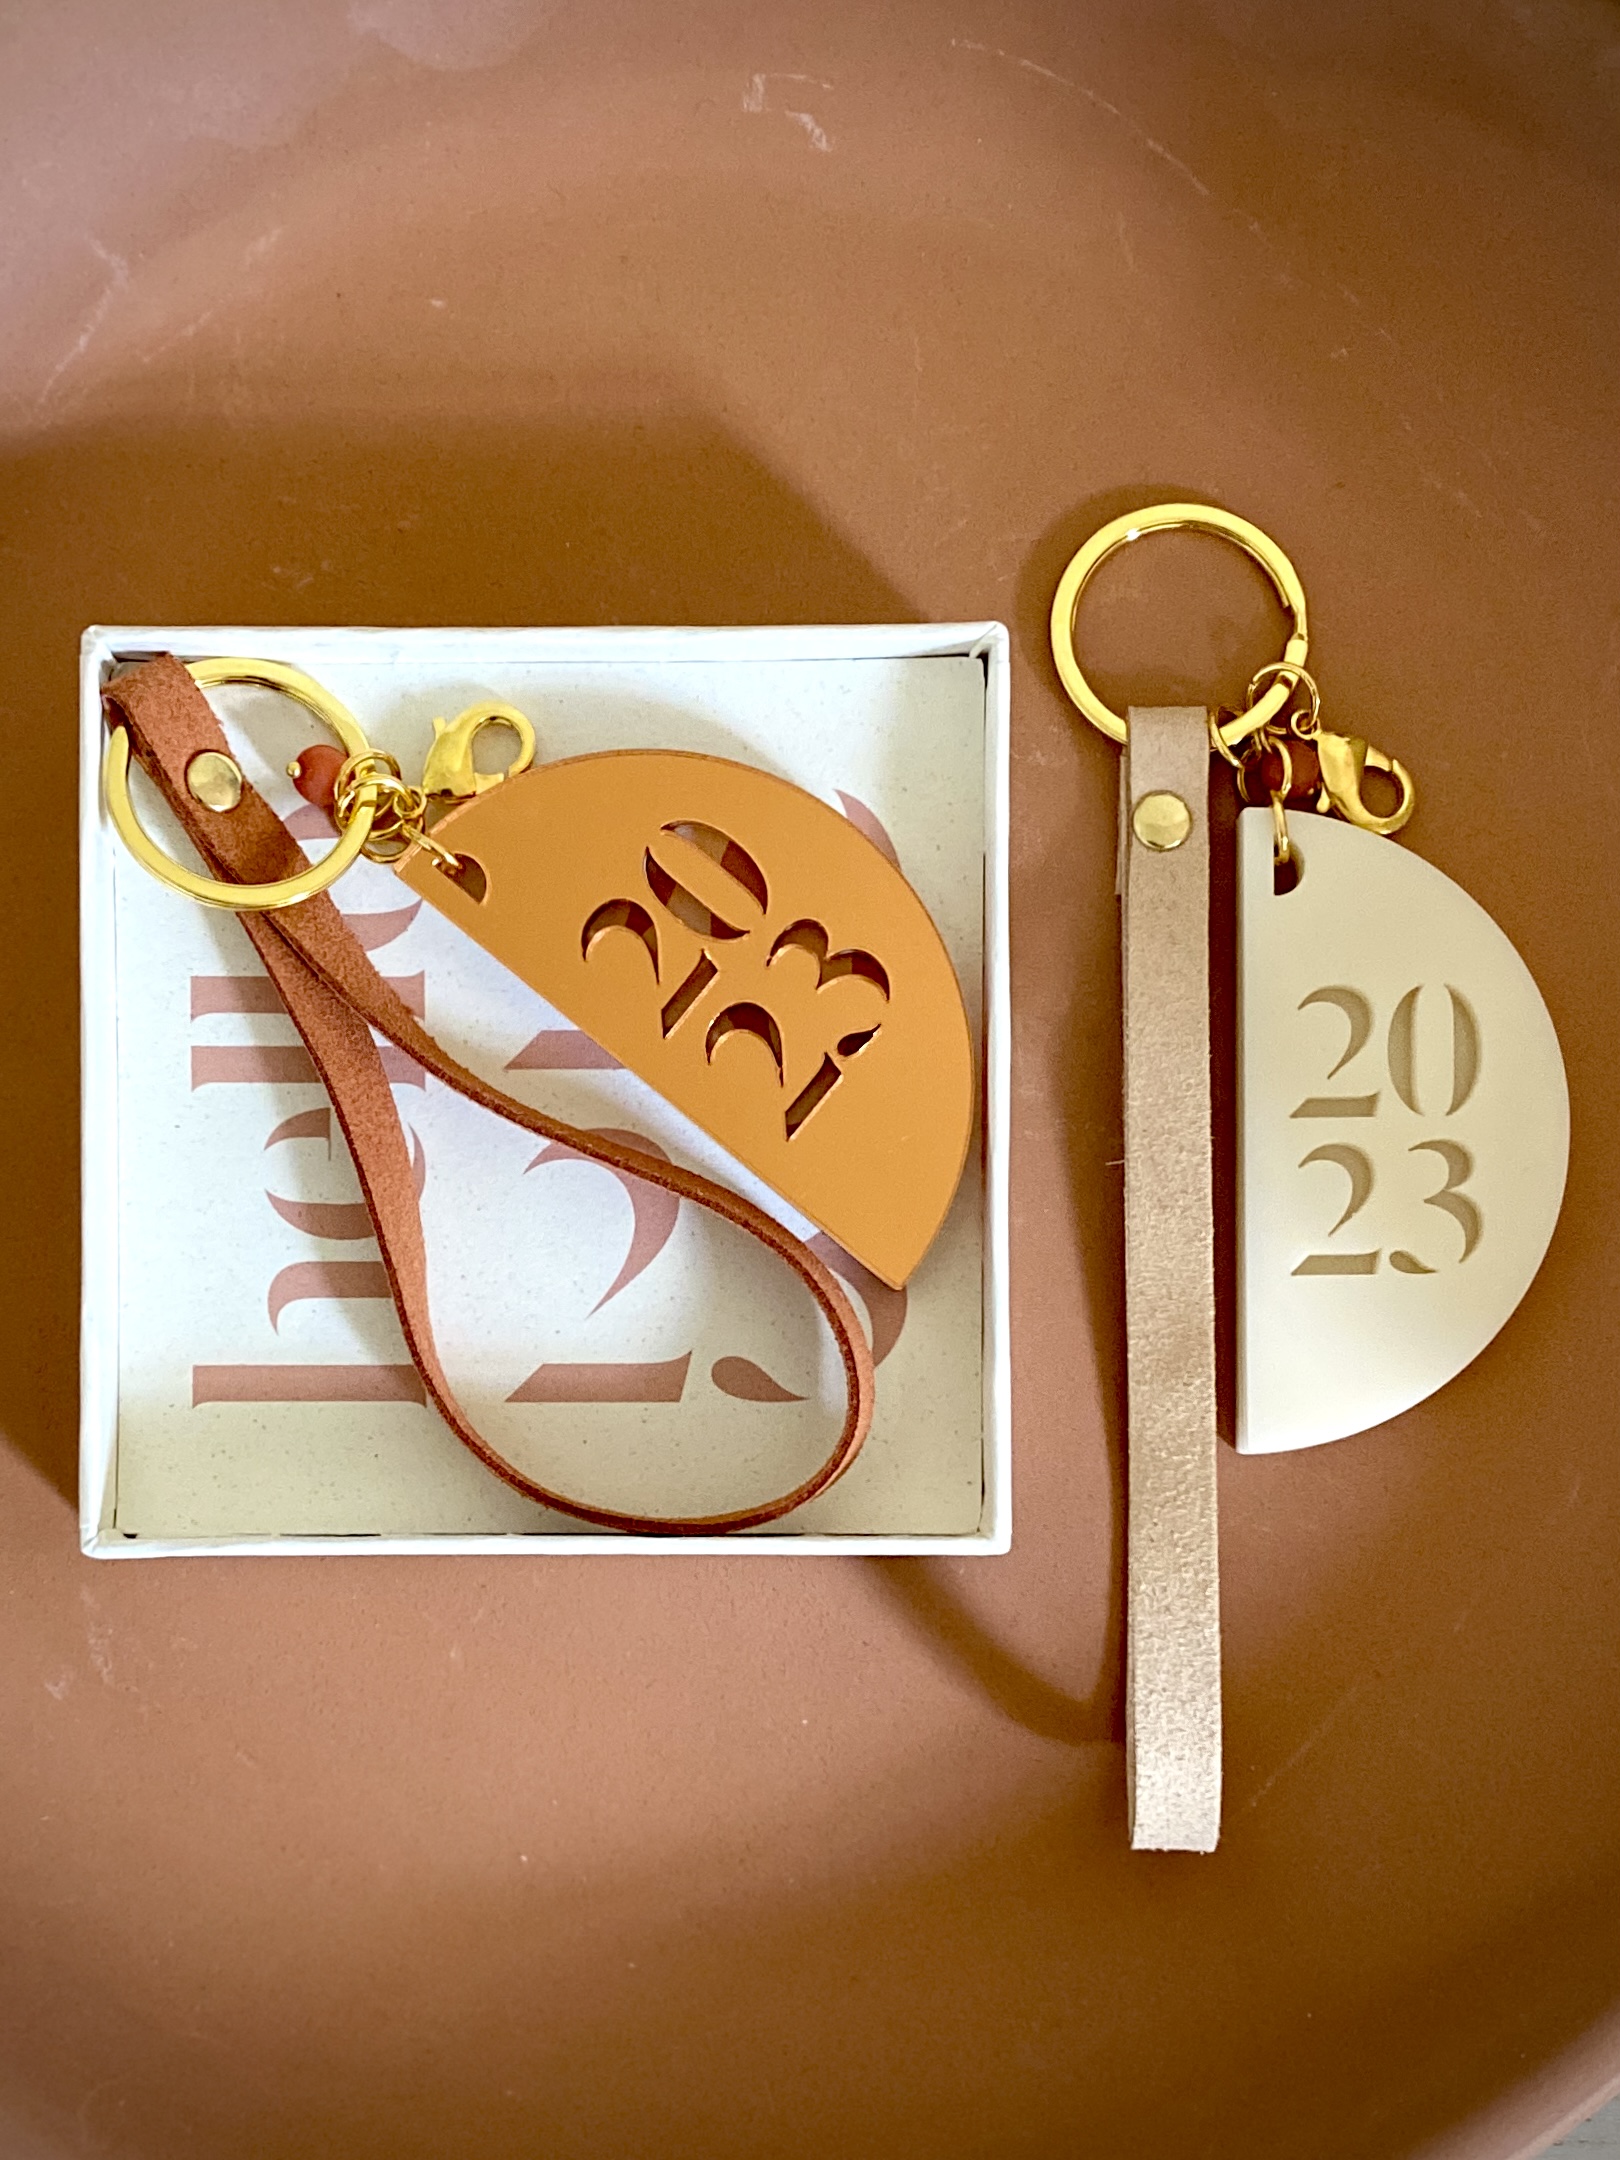 hello-2023-special-occasion-lucky-charm-keychain-two-colour-versions